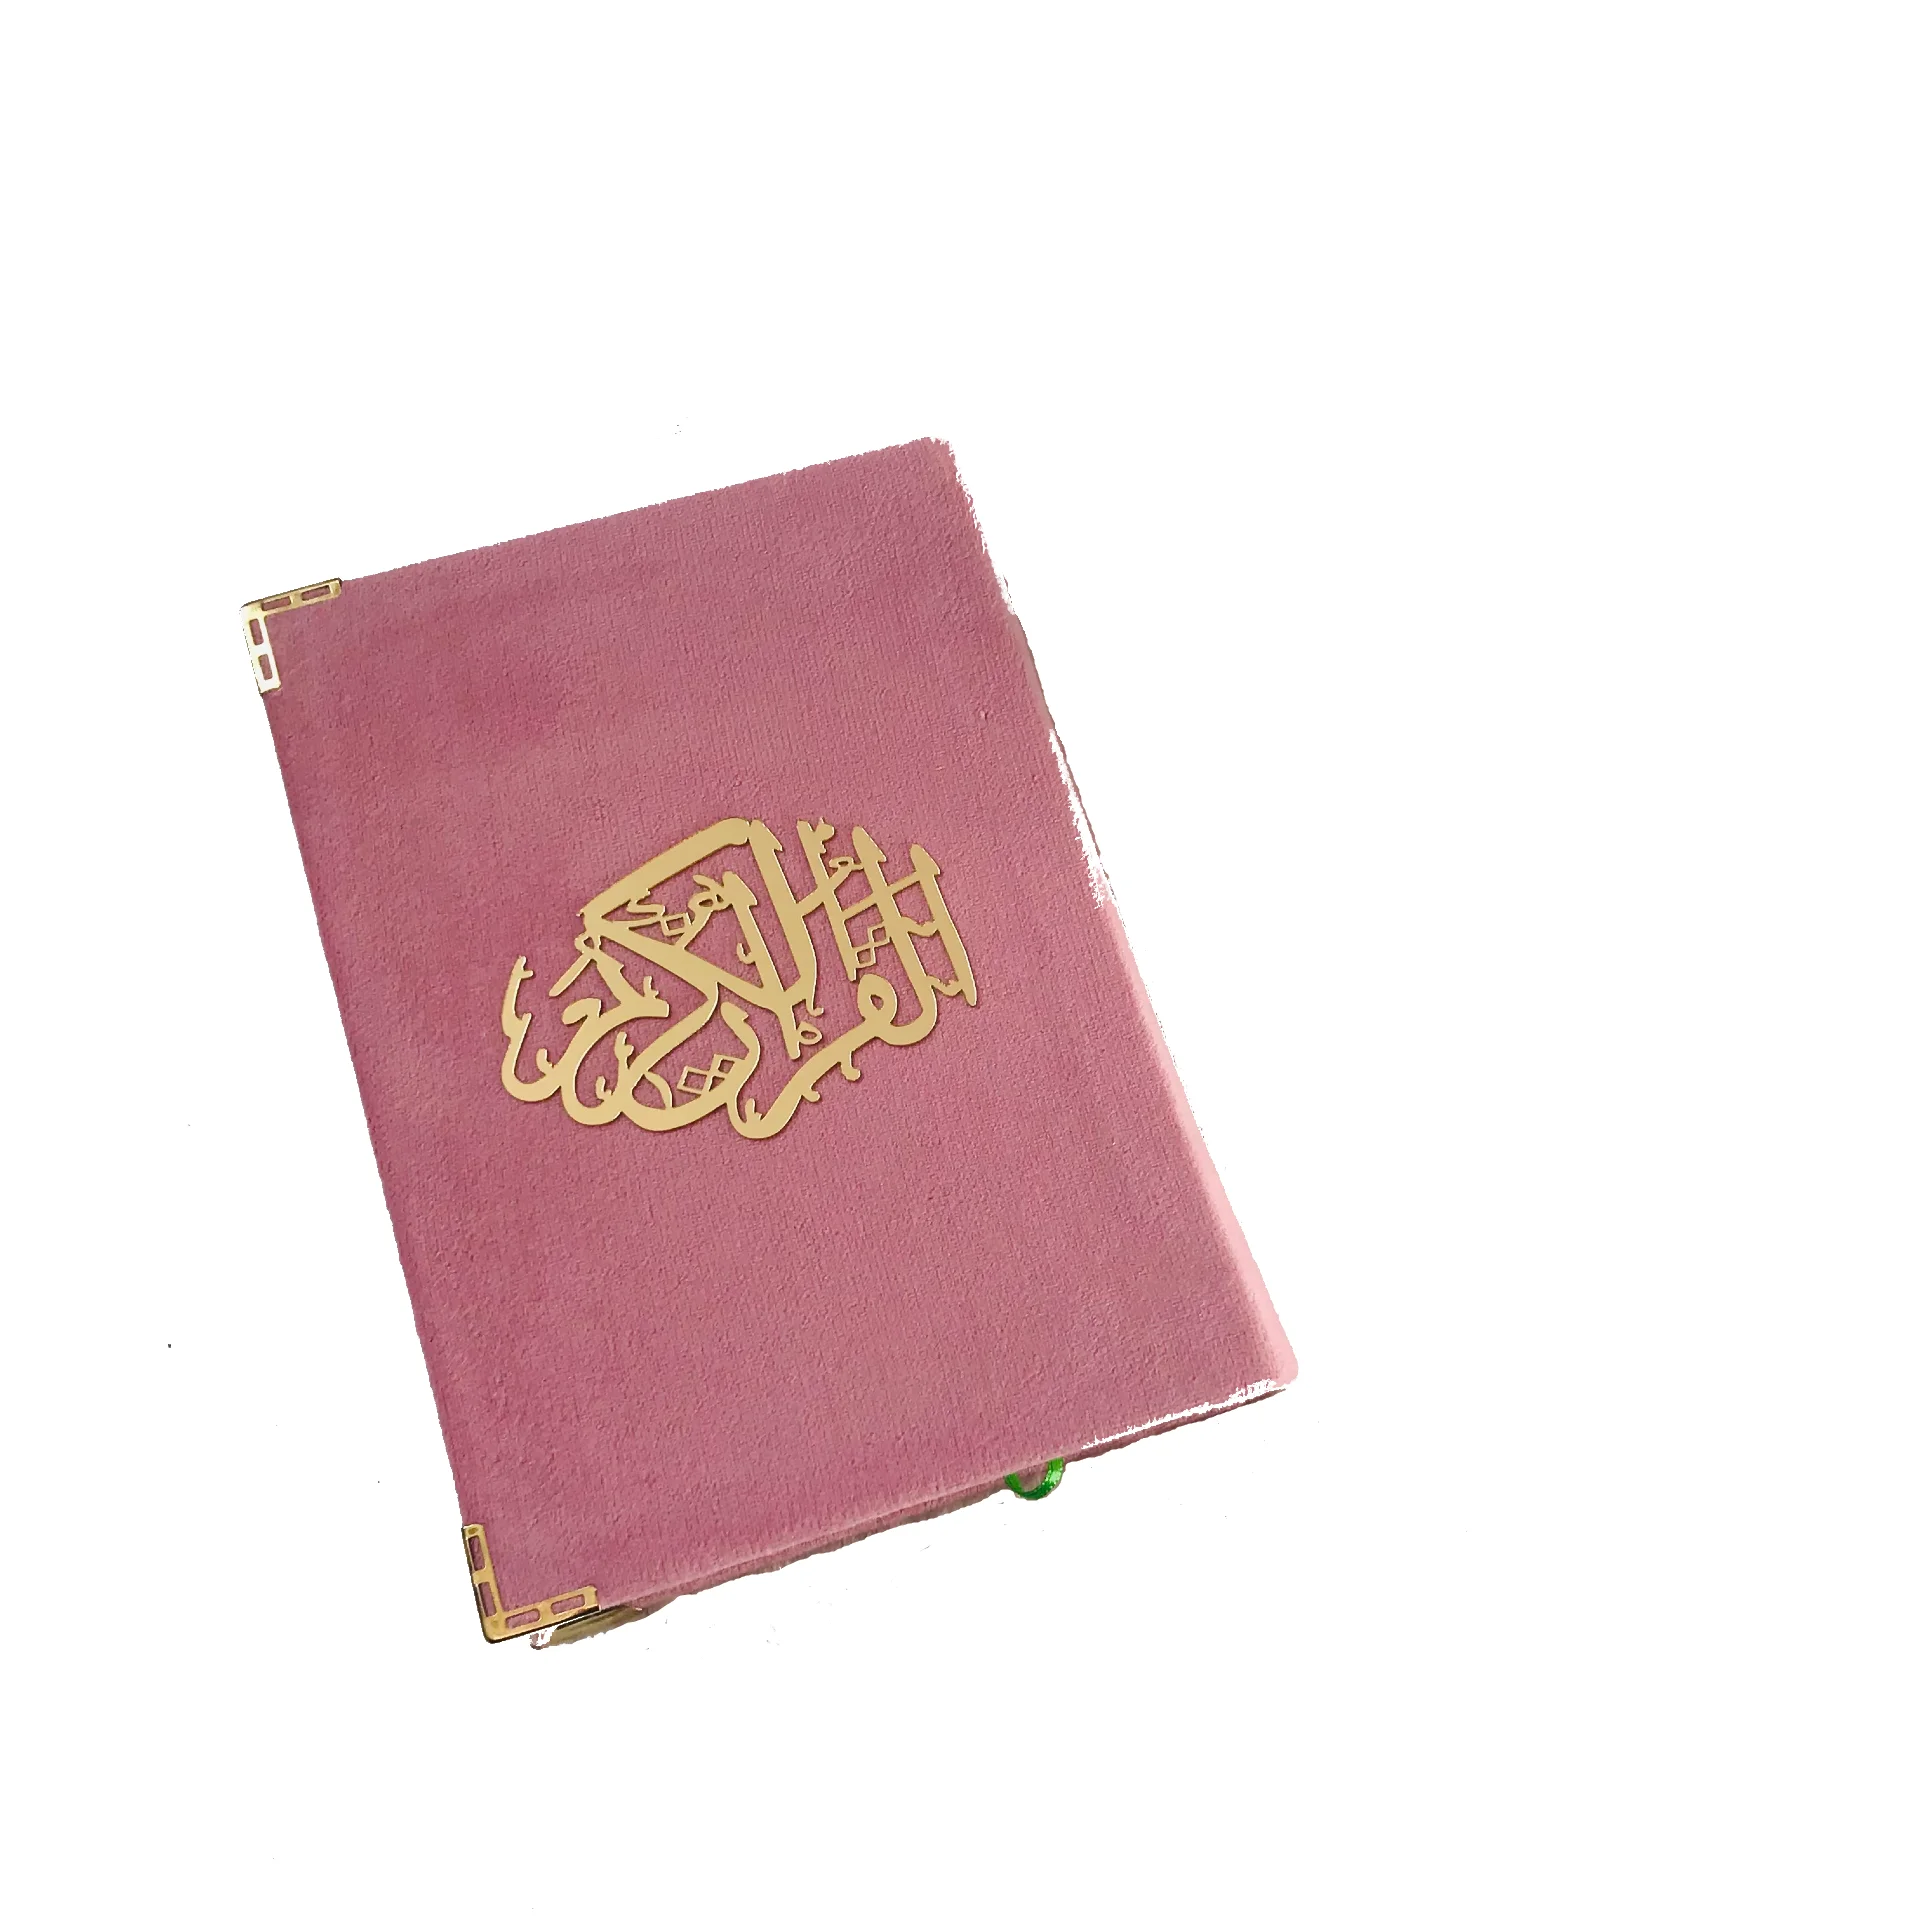 French Quran, Velvet Covered Coran, Moshaf, French Translation, With Arabic, Islamic Gifts, Muslim Items, Muslim Quran